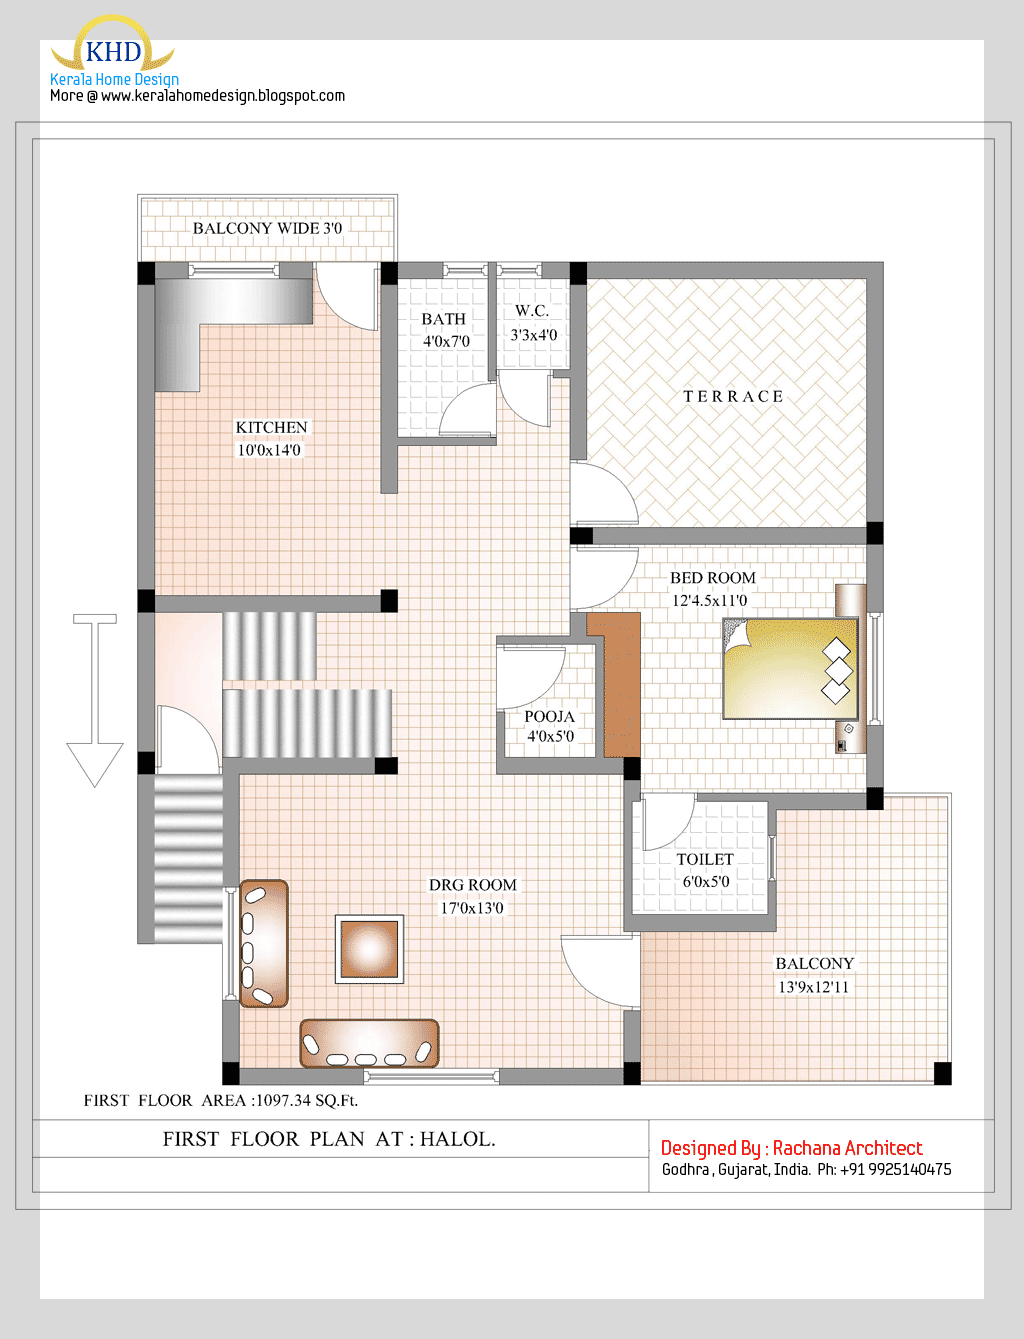 Duplex House Plan and Elevation - 2349 Sq. Ft. | home ...